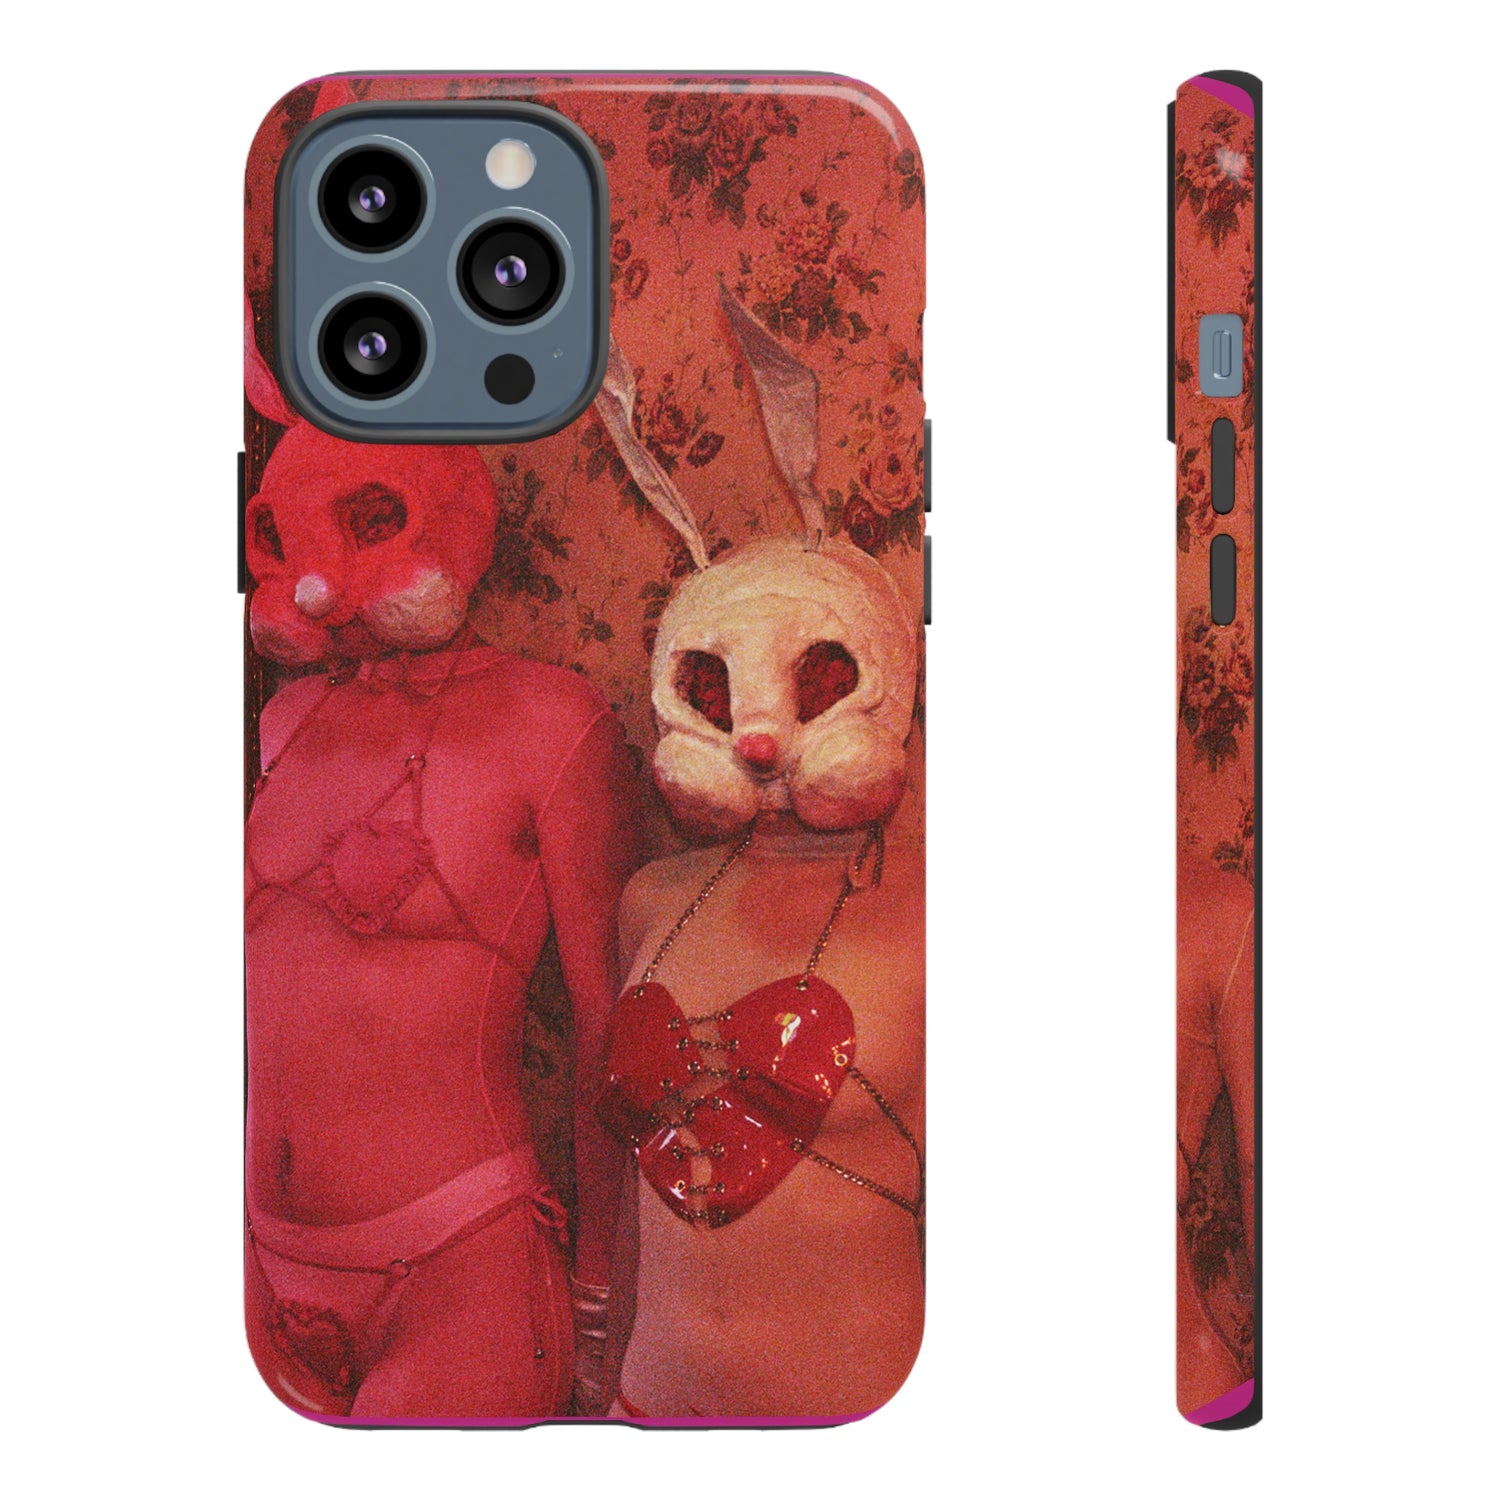 bunny girl iphone cases